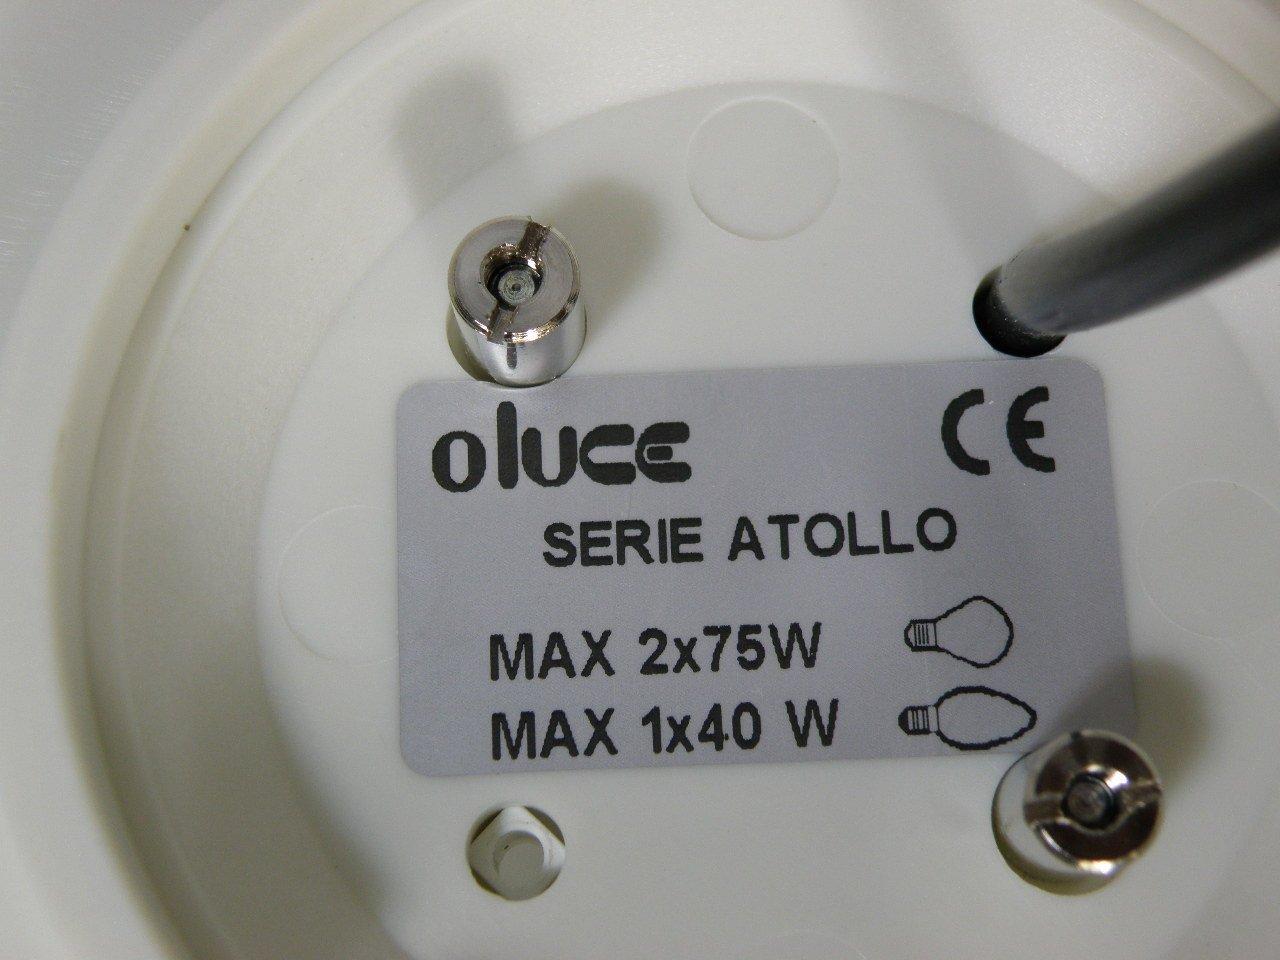 Glass Table Lamp Atollo 237 by Vico Magistretti for Oluce In New Condition For Sale In Vienna, AT